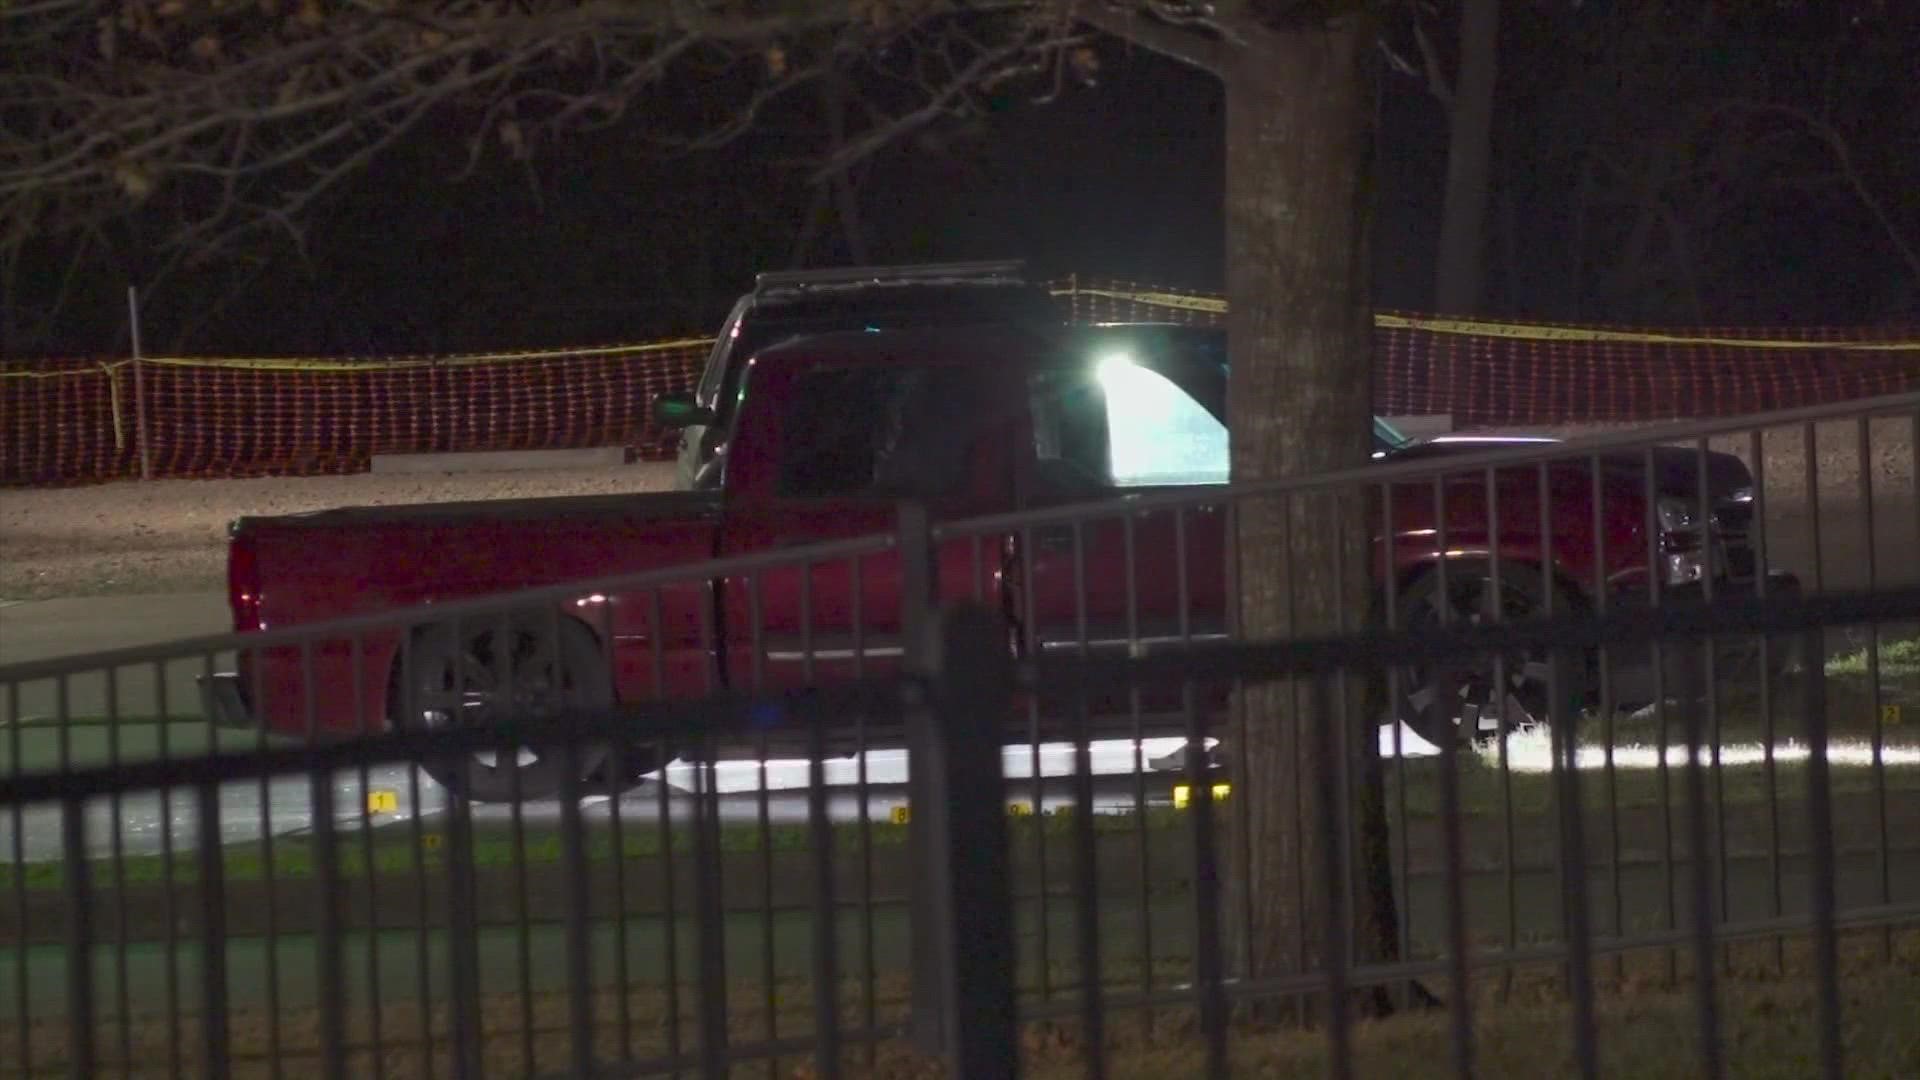 A man found shot to death in the parking lot of an elementary school on the east side may be connected to a second scene where a woman was found dead, police said.